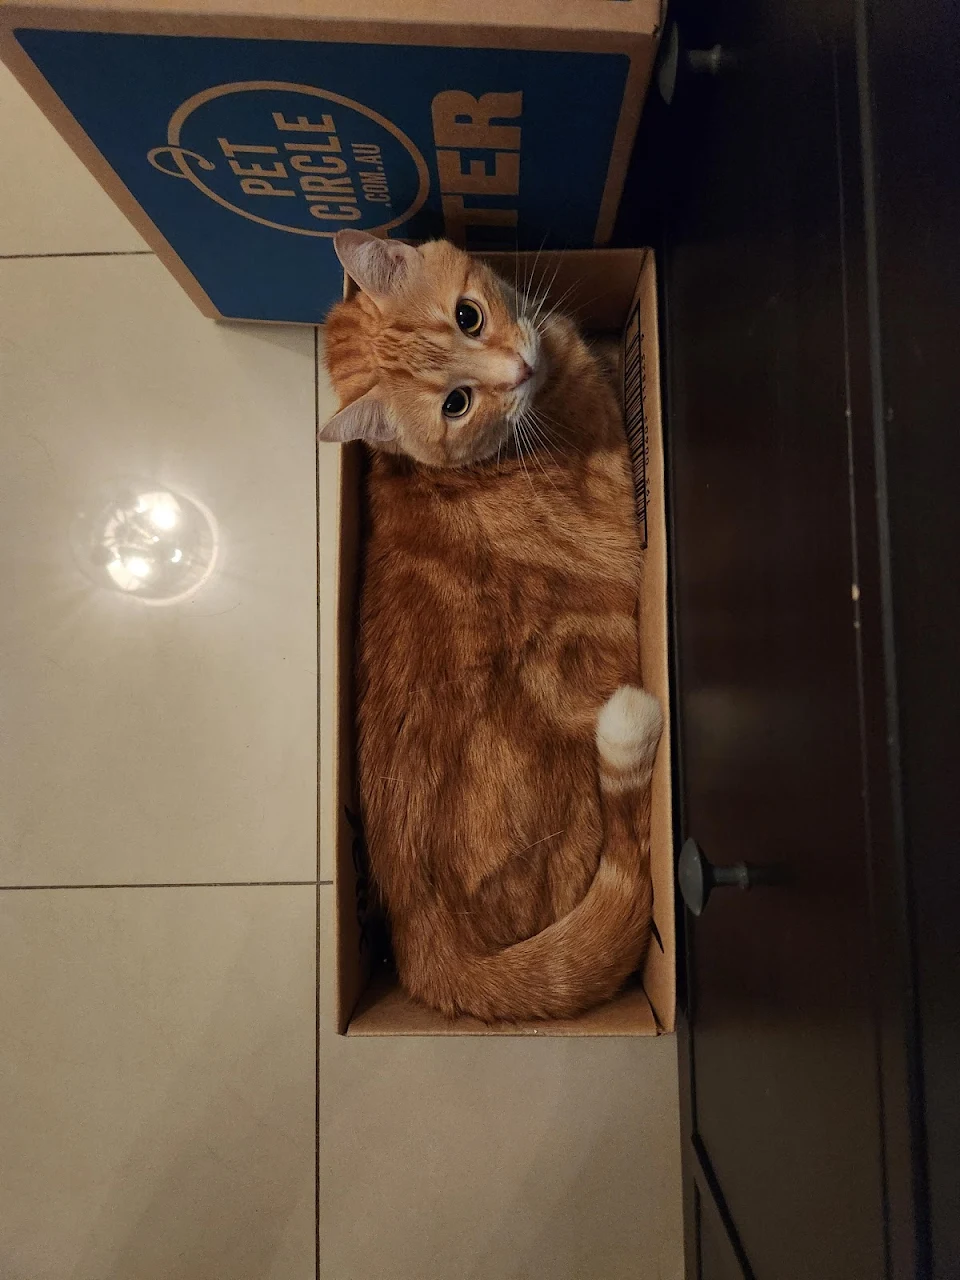 He thinks just because he can squeeze into this box, that he's slim. You are a fat boi.